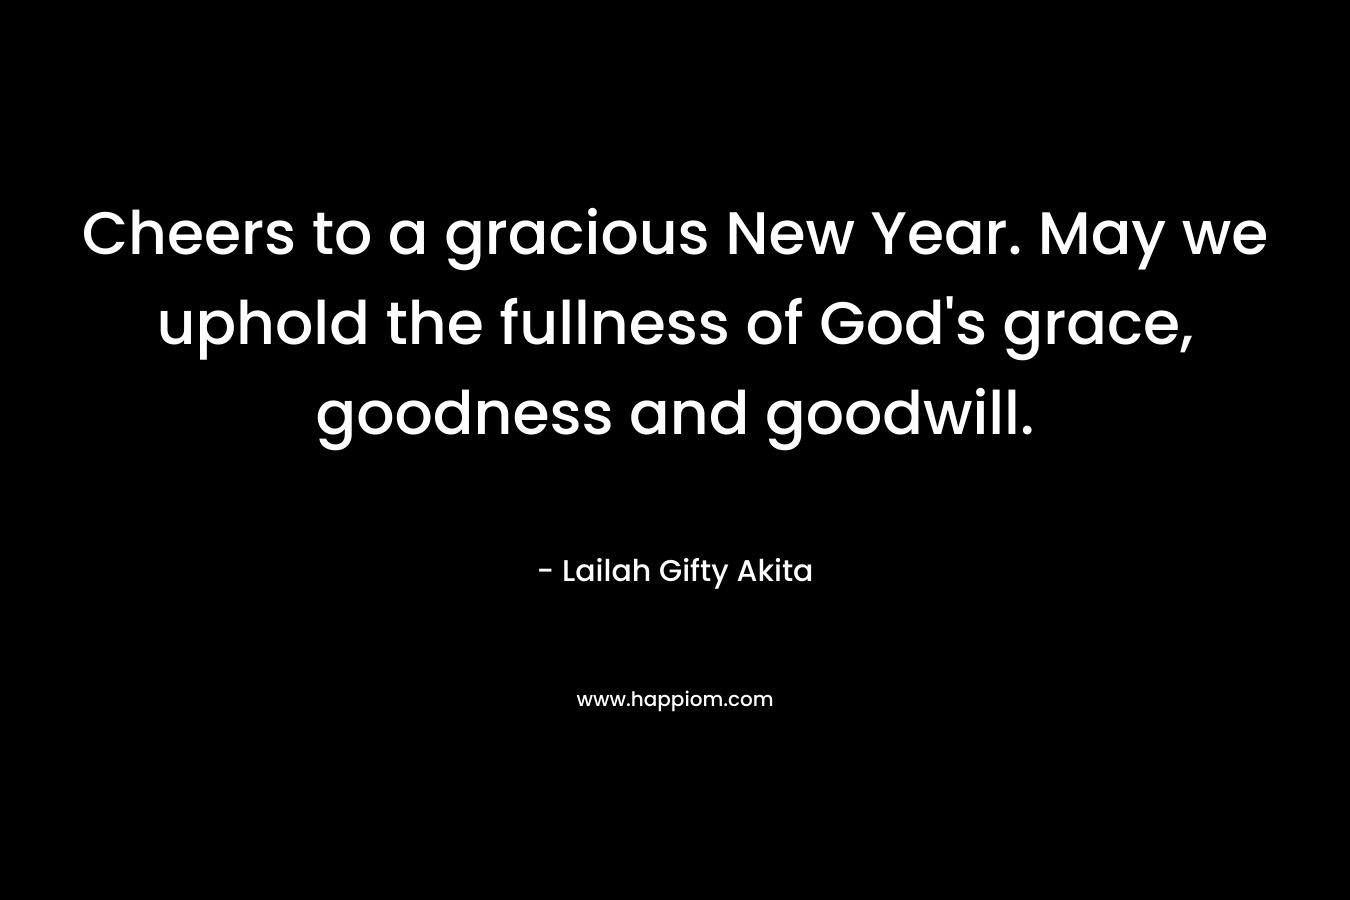 Cheers to a gracious New Year. May we uphold the fullness of God’s grace, goodness and goodwill. – Lailah Gifty Akita